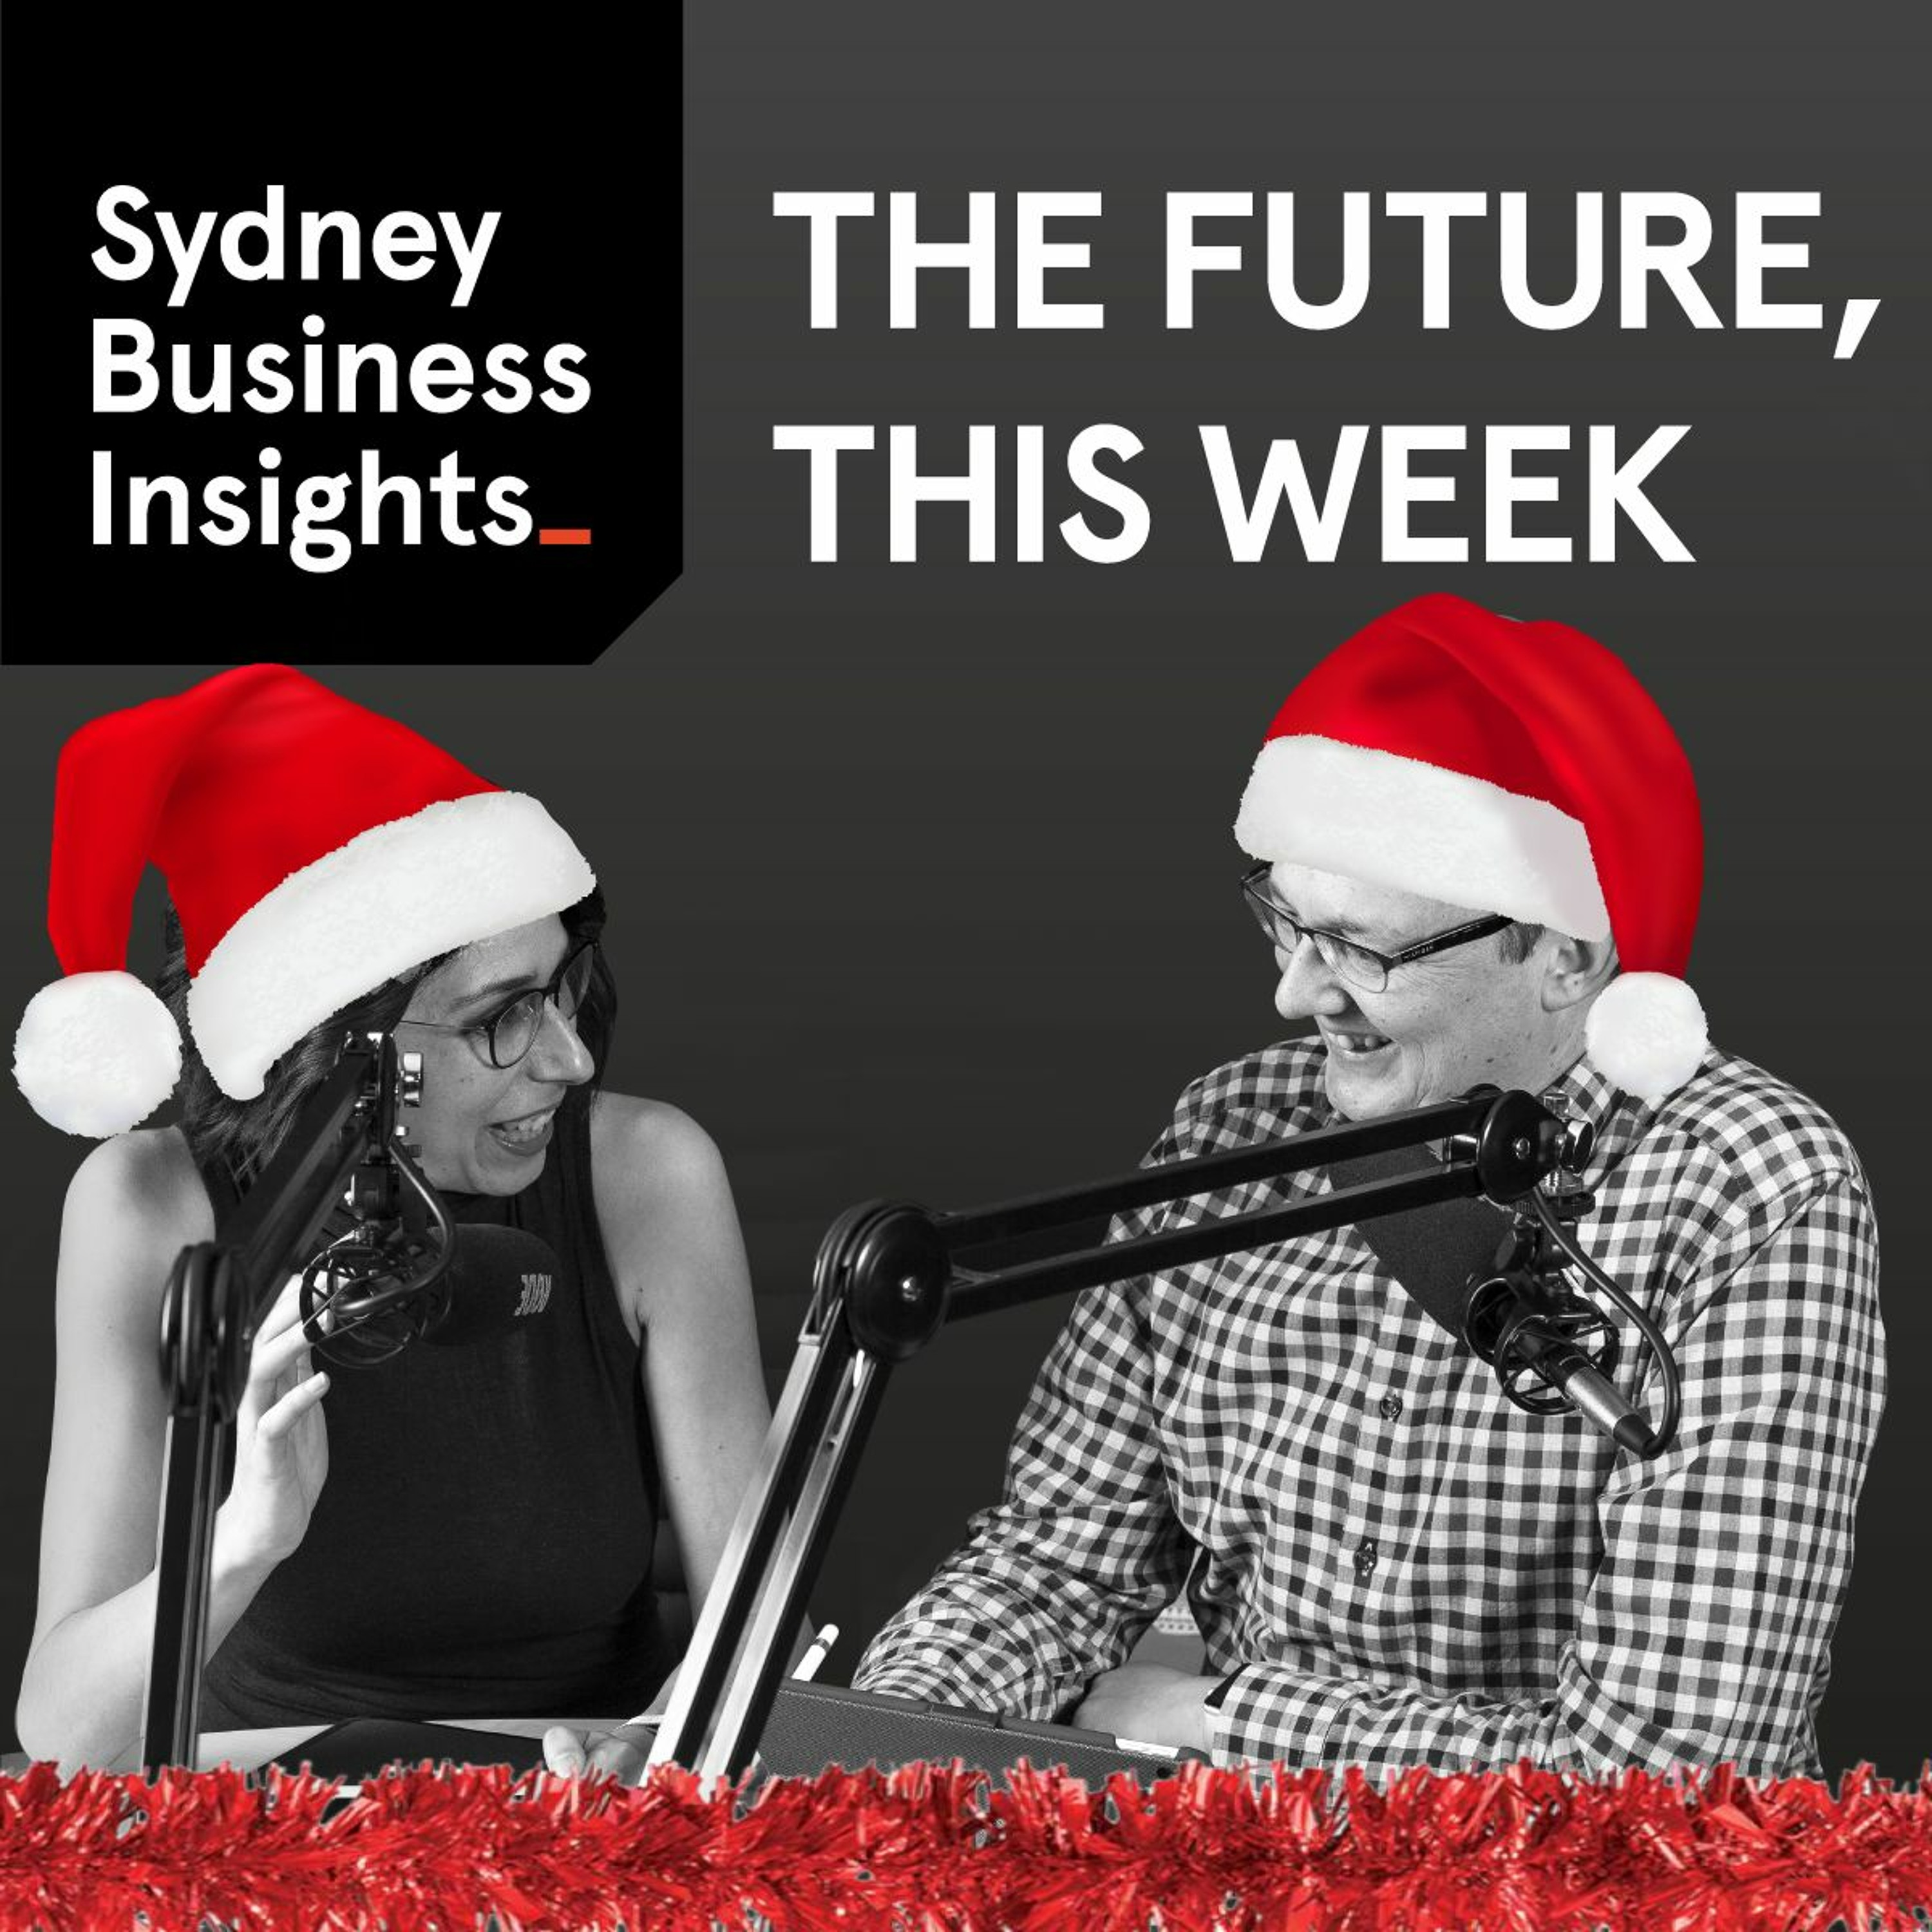 The Future, This Week 22 Dec 2017